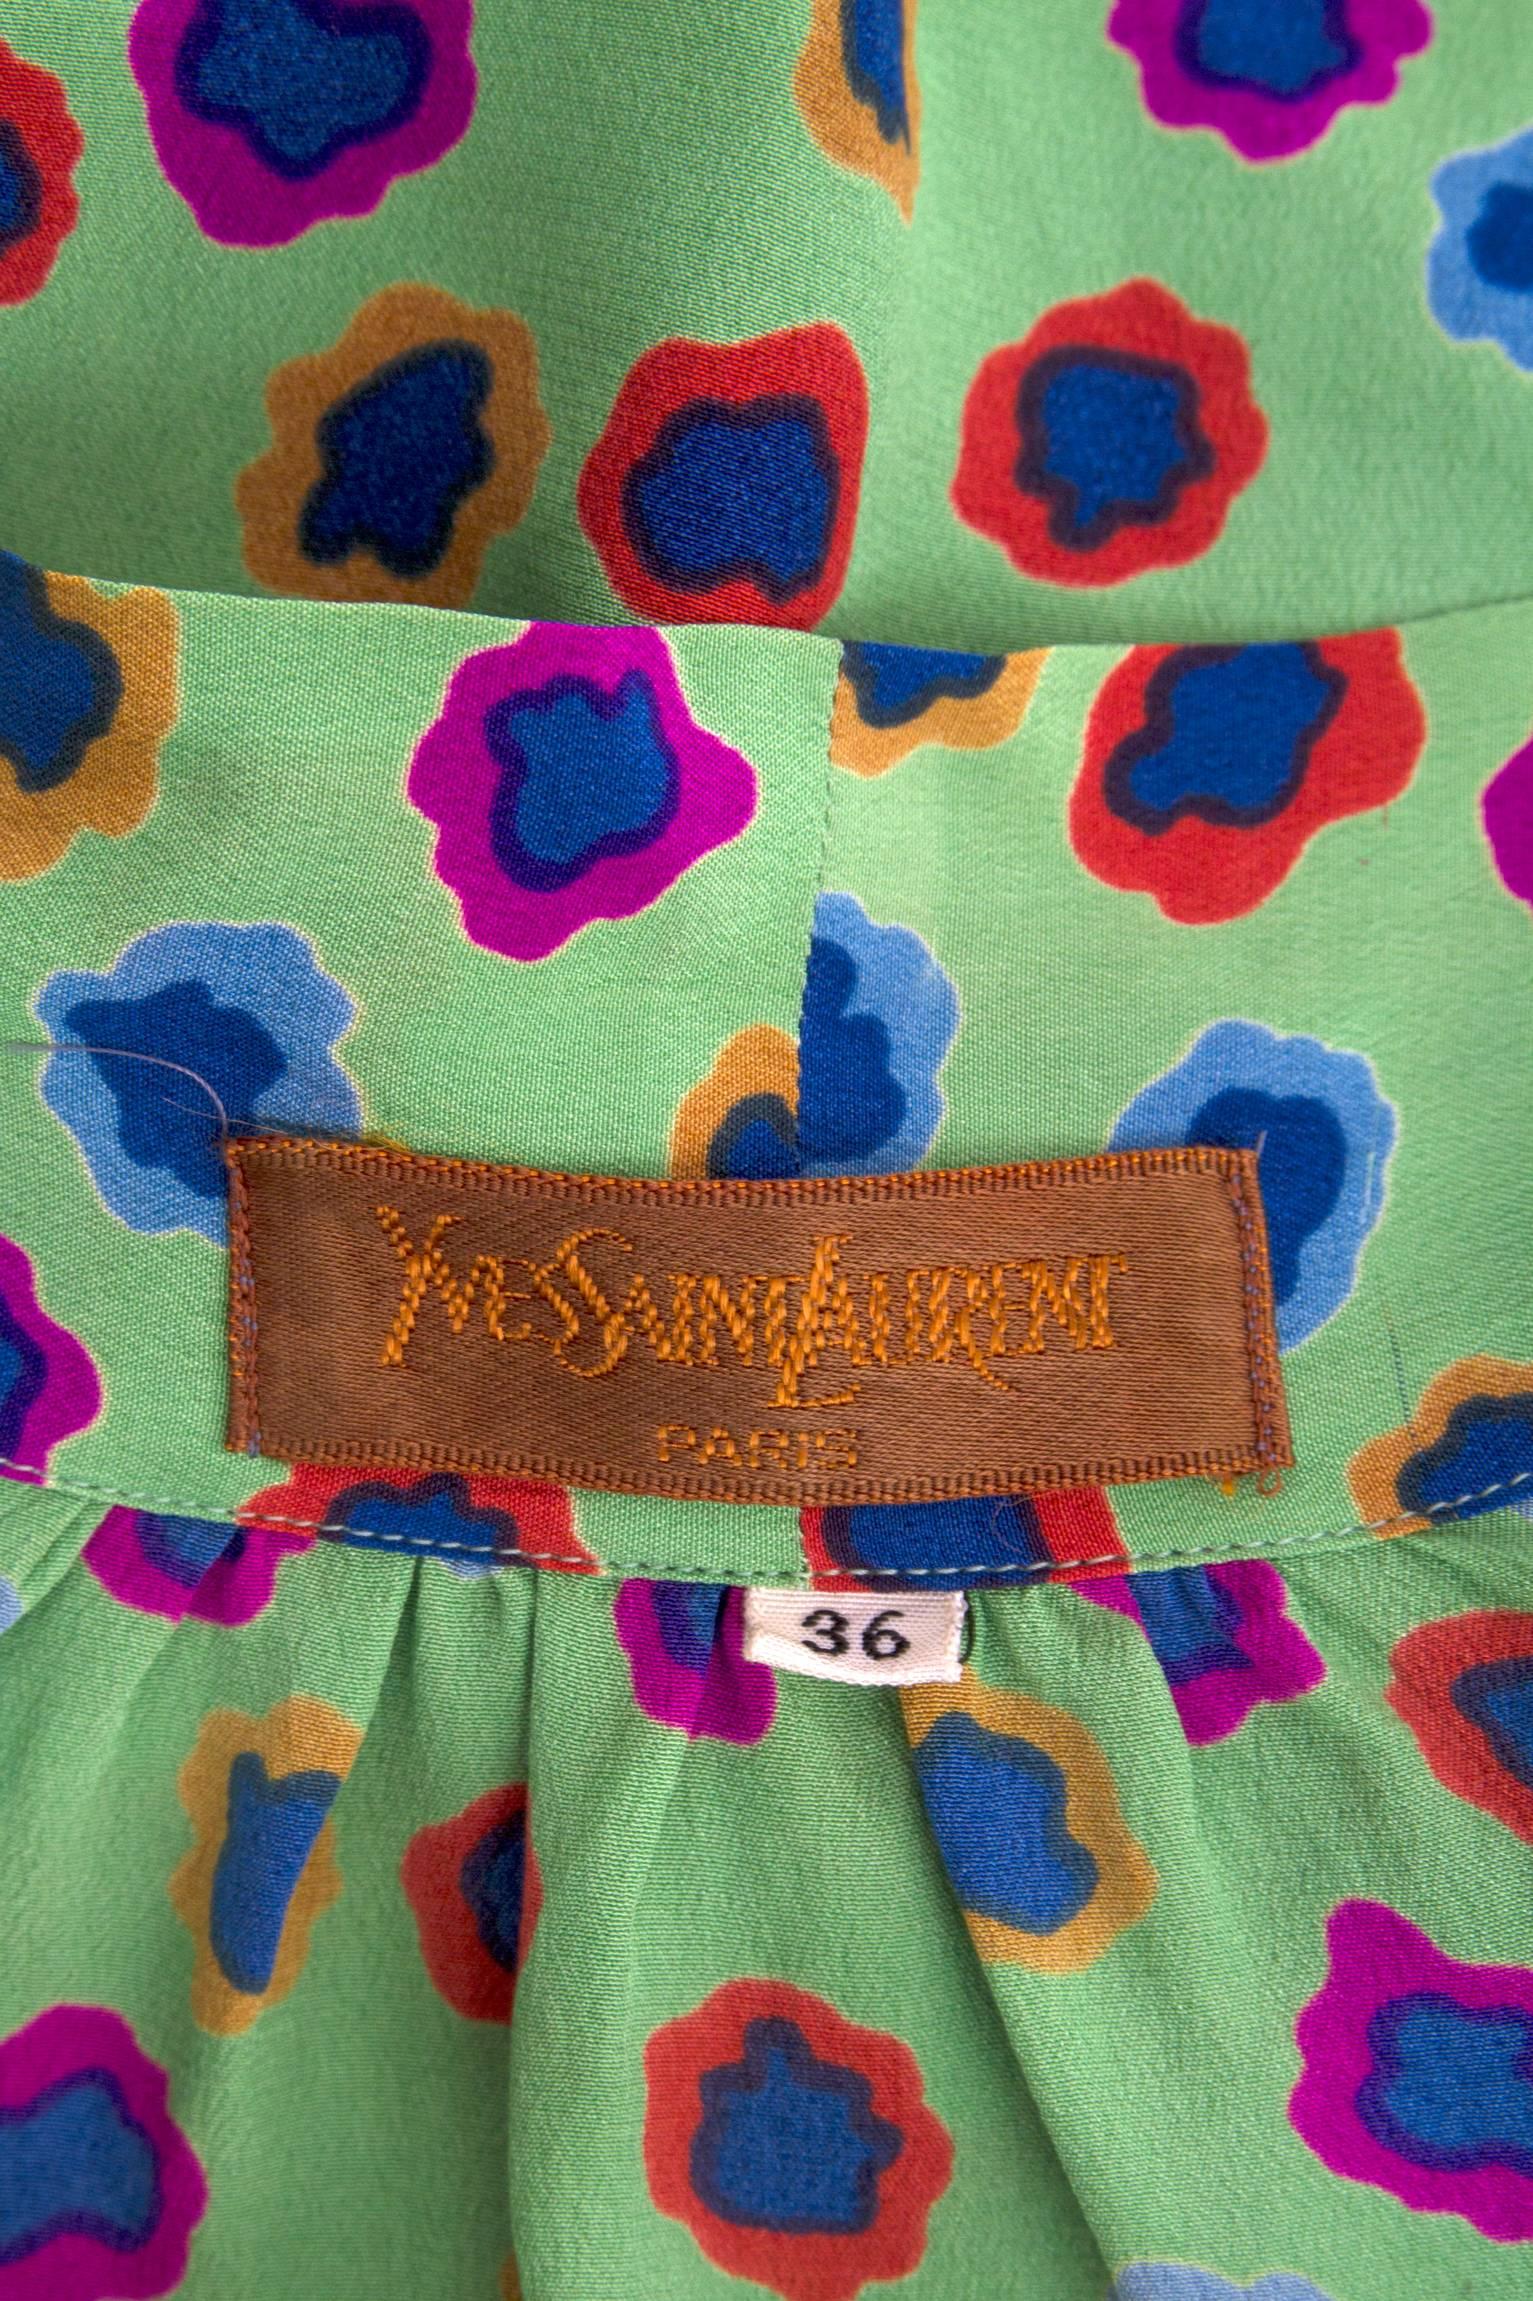 A fun 1980s Yves Saint Laurent pussy bow silk blouse with a hidden front buttoned closure and one buttoned cuffs. The blouse has an abstract floral print in bright yellow, pink, orange and blues, which stand as a complimenting contrast to the light